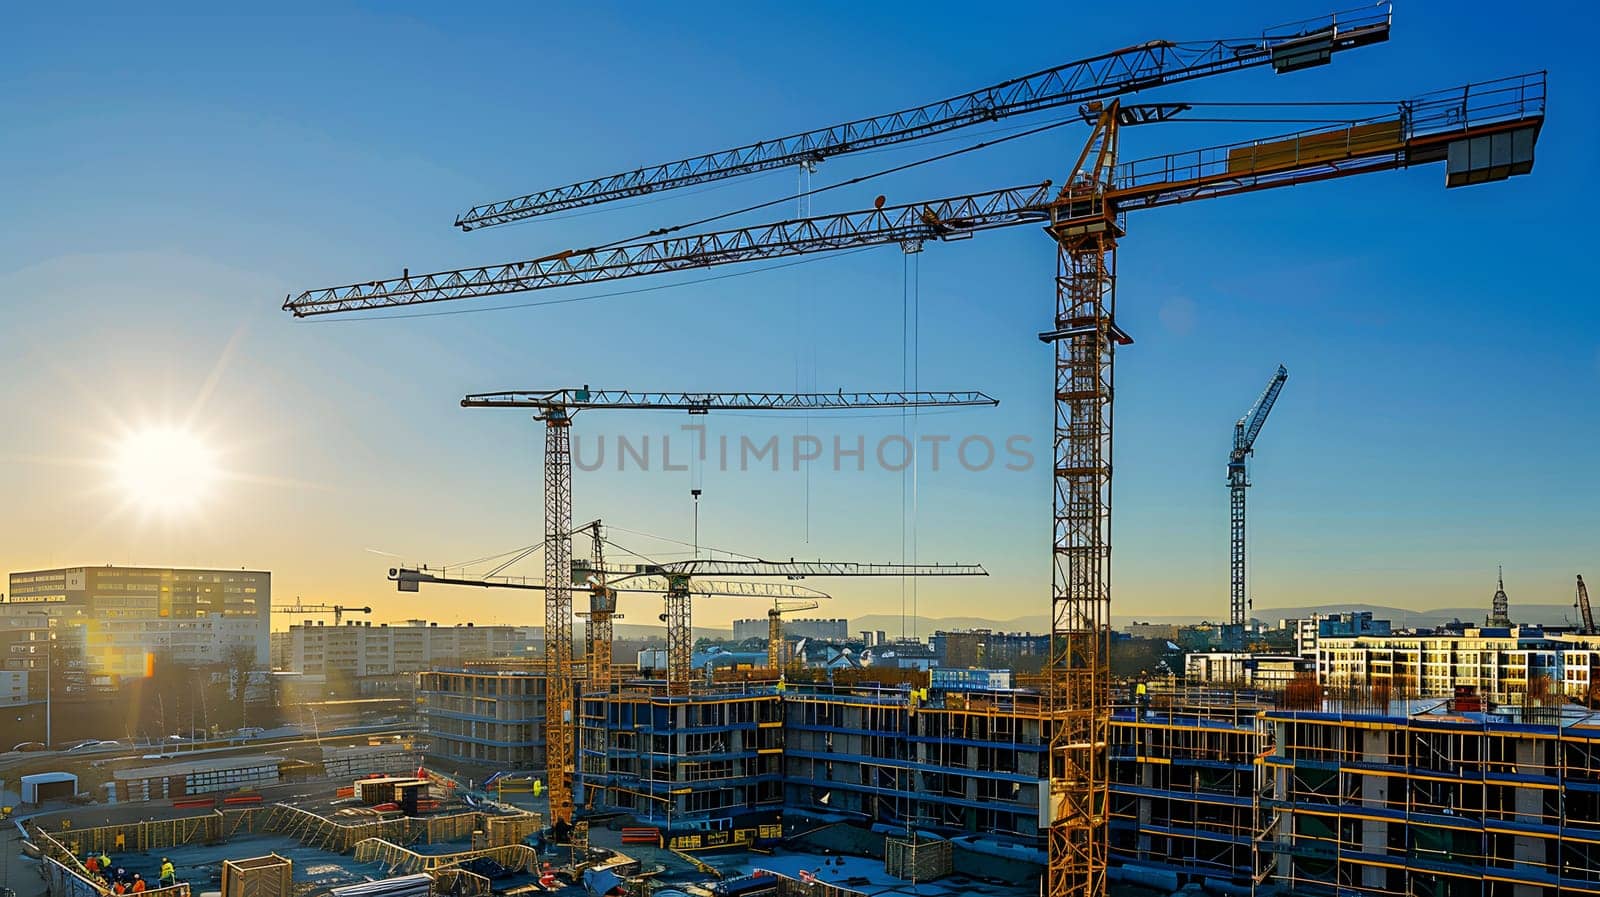 The construction site is a symphony of cranes towering against the citys skyline. Buildings are rising with composite materials and electric power, shaping the urban design of the future